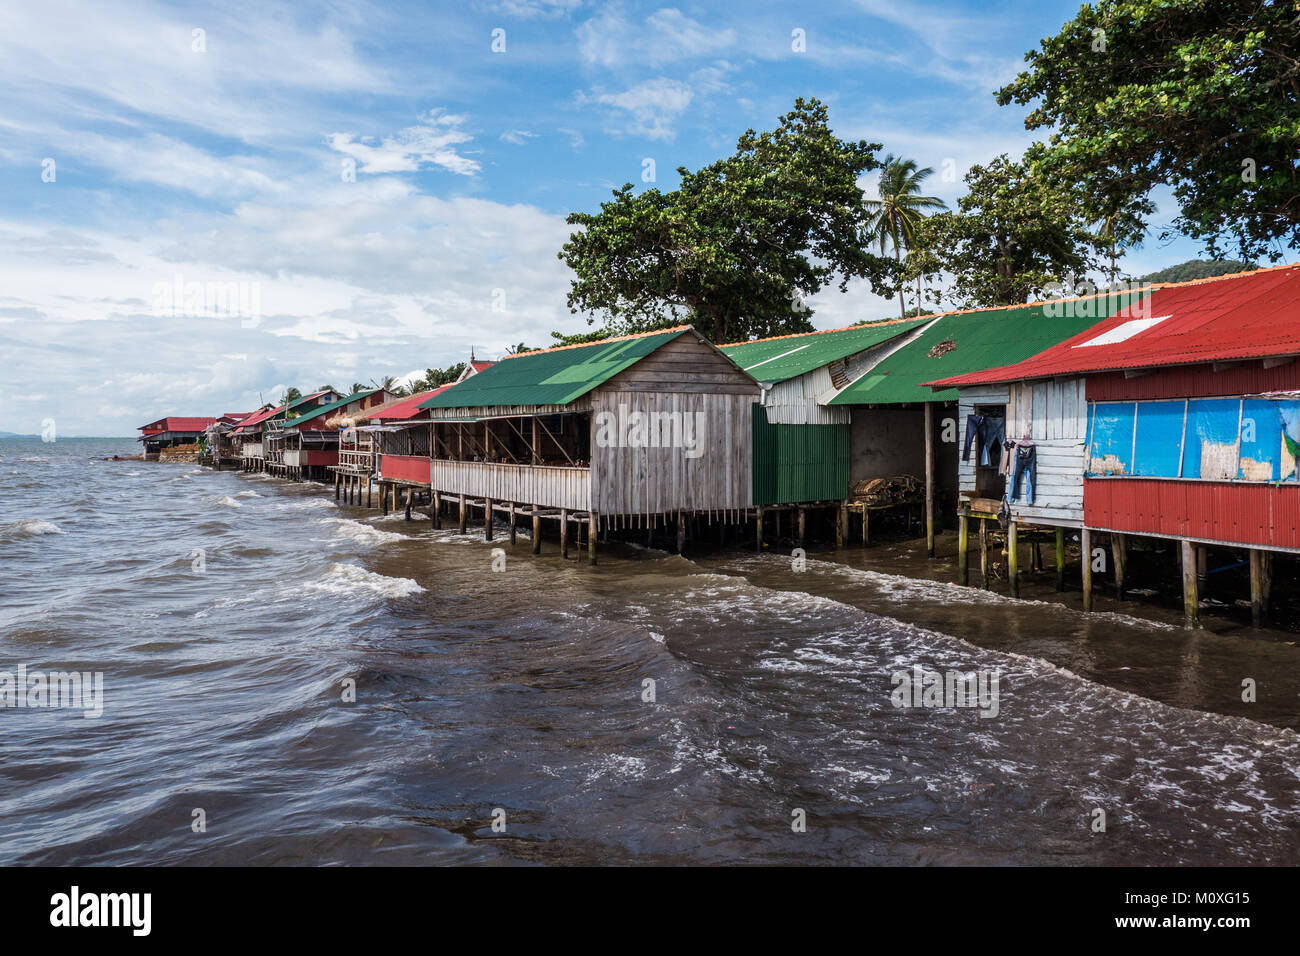 A line of crab and seafood restaurants lined along the muddy beach in Kep, Cambodia Stock Photo